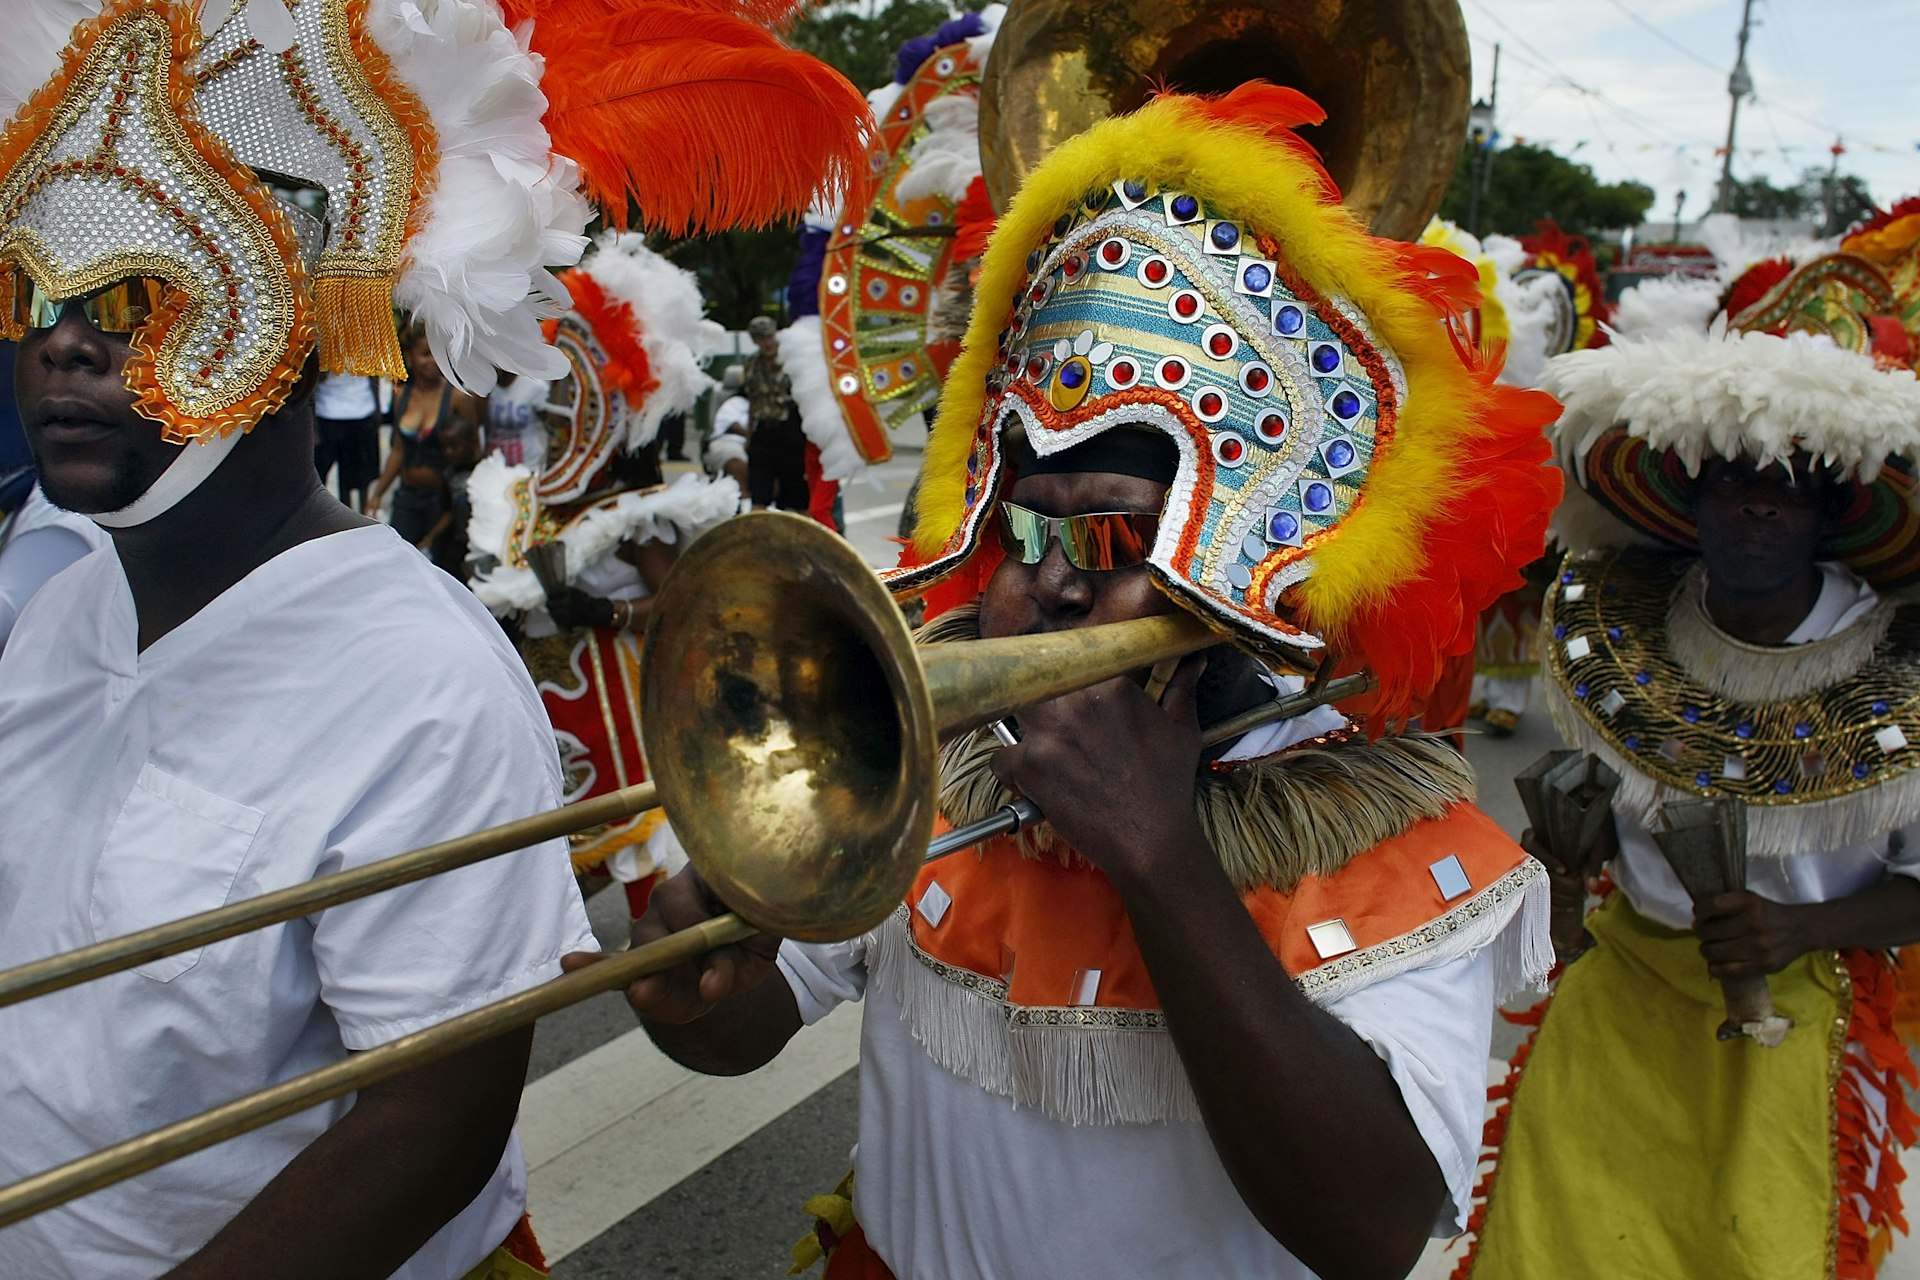 Musicians participate in the Junkanoo parade at the Goombay Festival on June 6, 2009 in Coconut Grove, Florida.  The festival is a celebration of culture expression embracing the legacy of a Bahamian-rooted community.